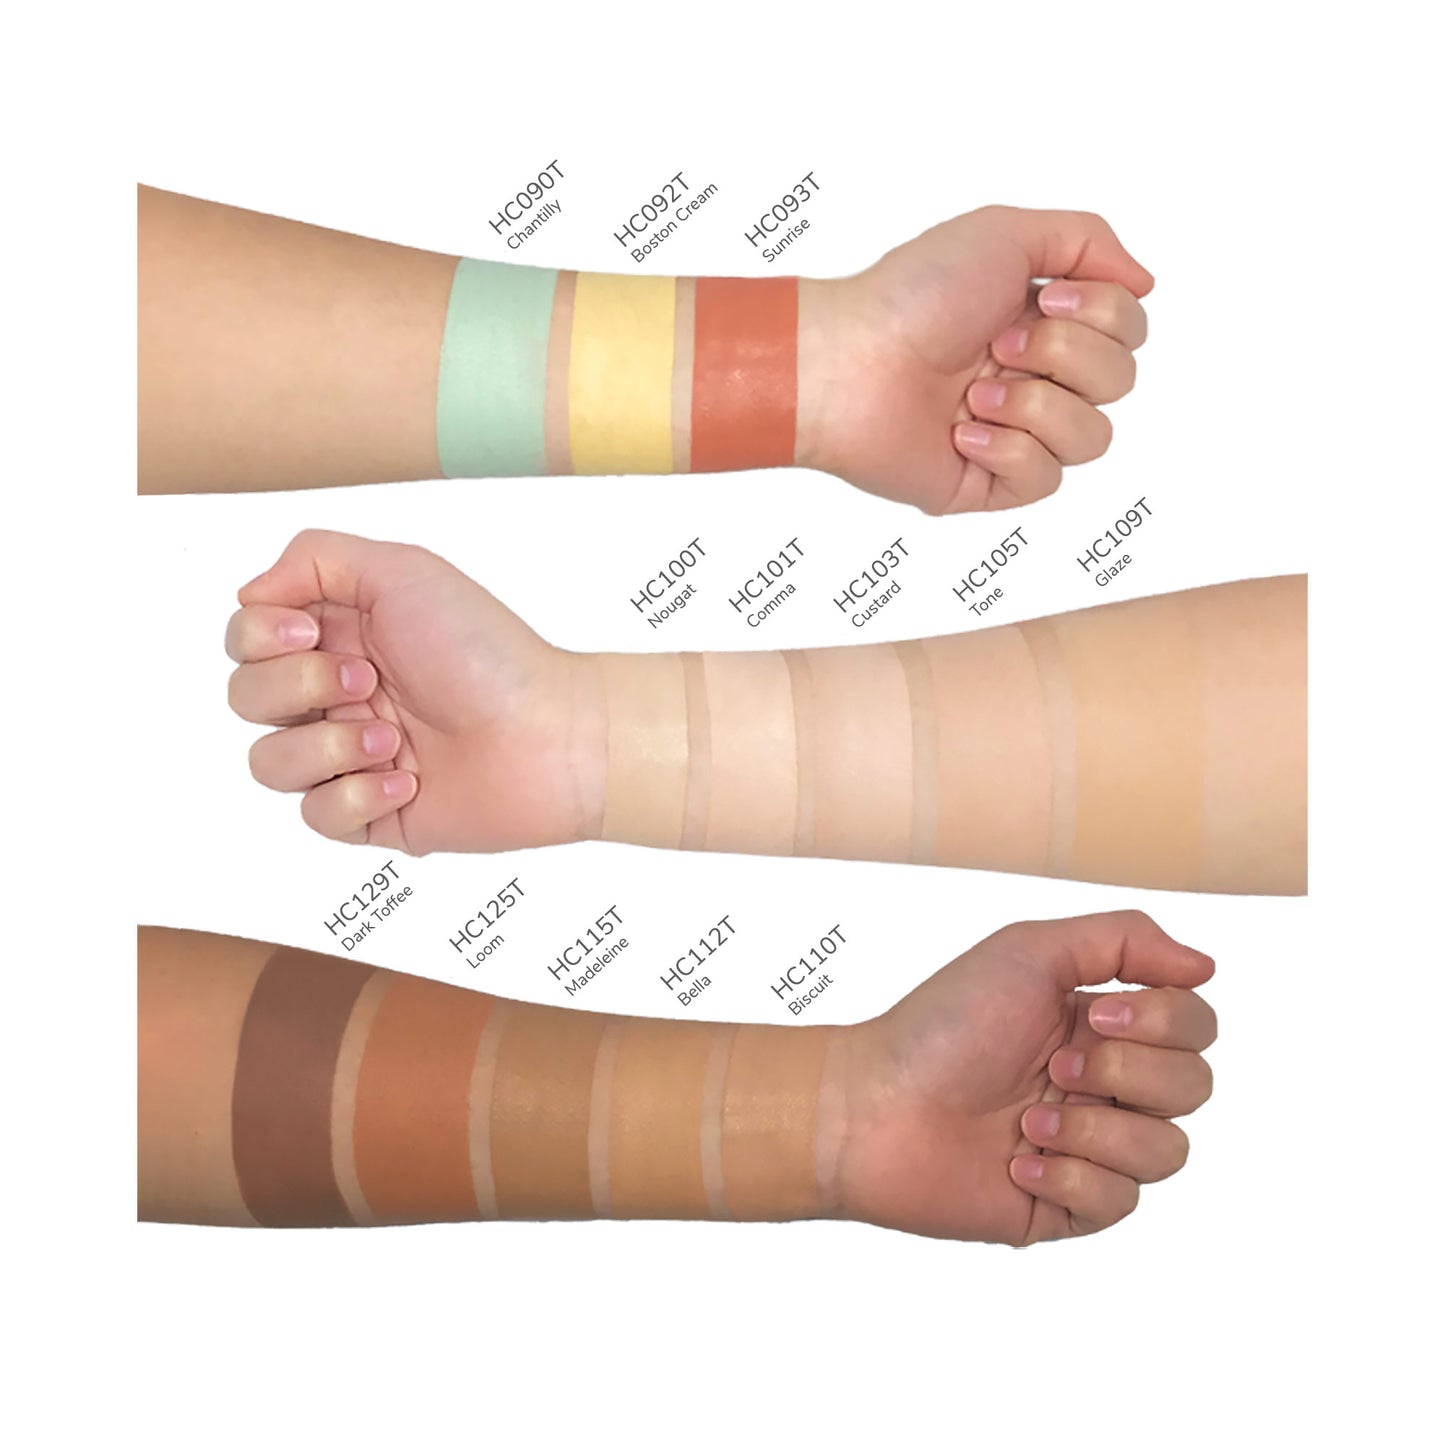 Introducing Cruisin Organics Bella Concealing Cream. With 13 shades to choose from, our full-coverage, brightening concealer is perfect for spot treatments and color correcting. Its creamy formula blends effortlessly, giving you a more youthful and radiant complexion. Use the doe foot applicator to easily dab on tough, dark spots.